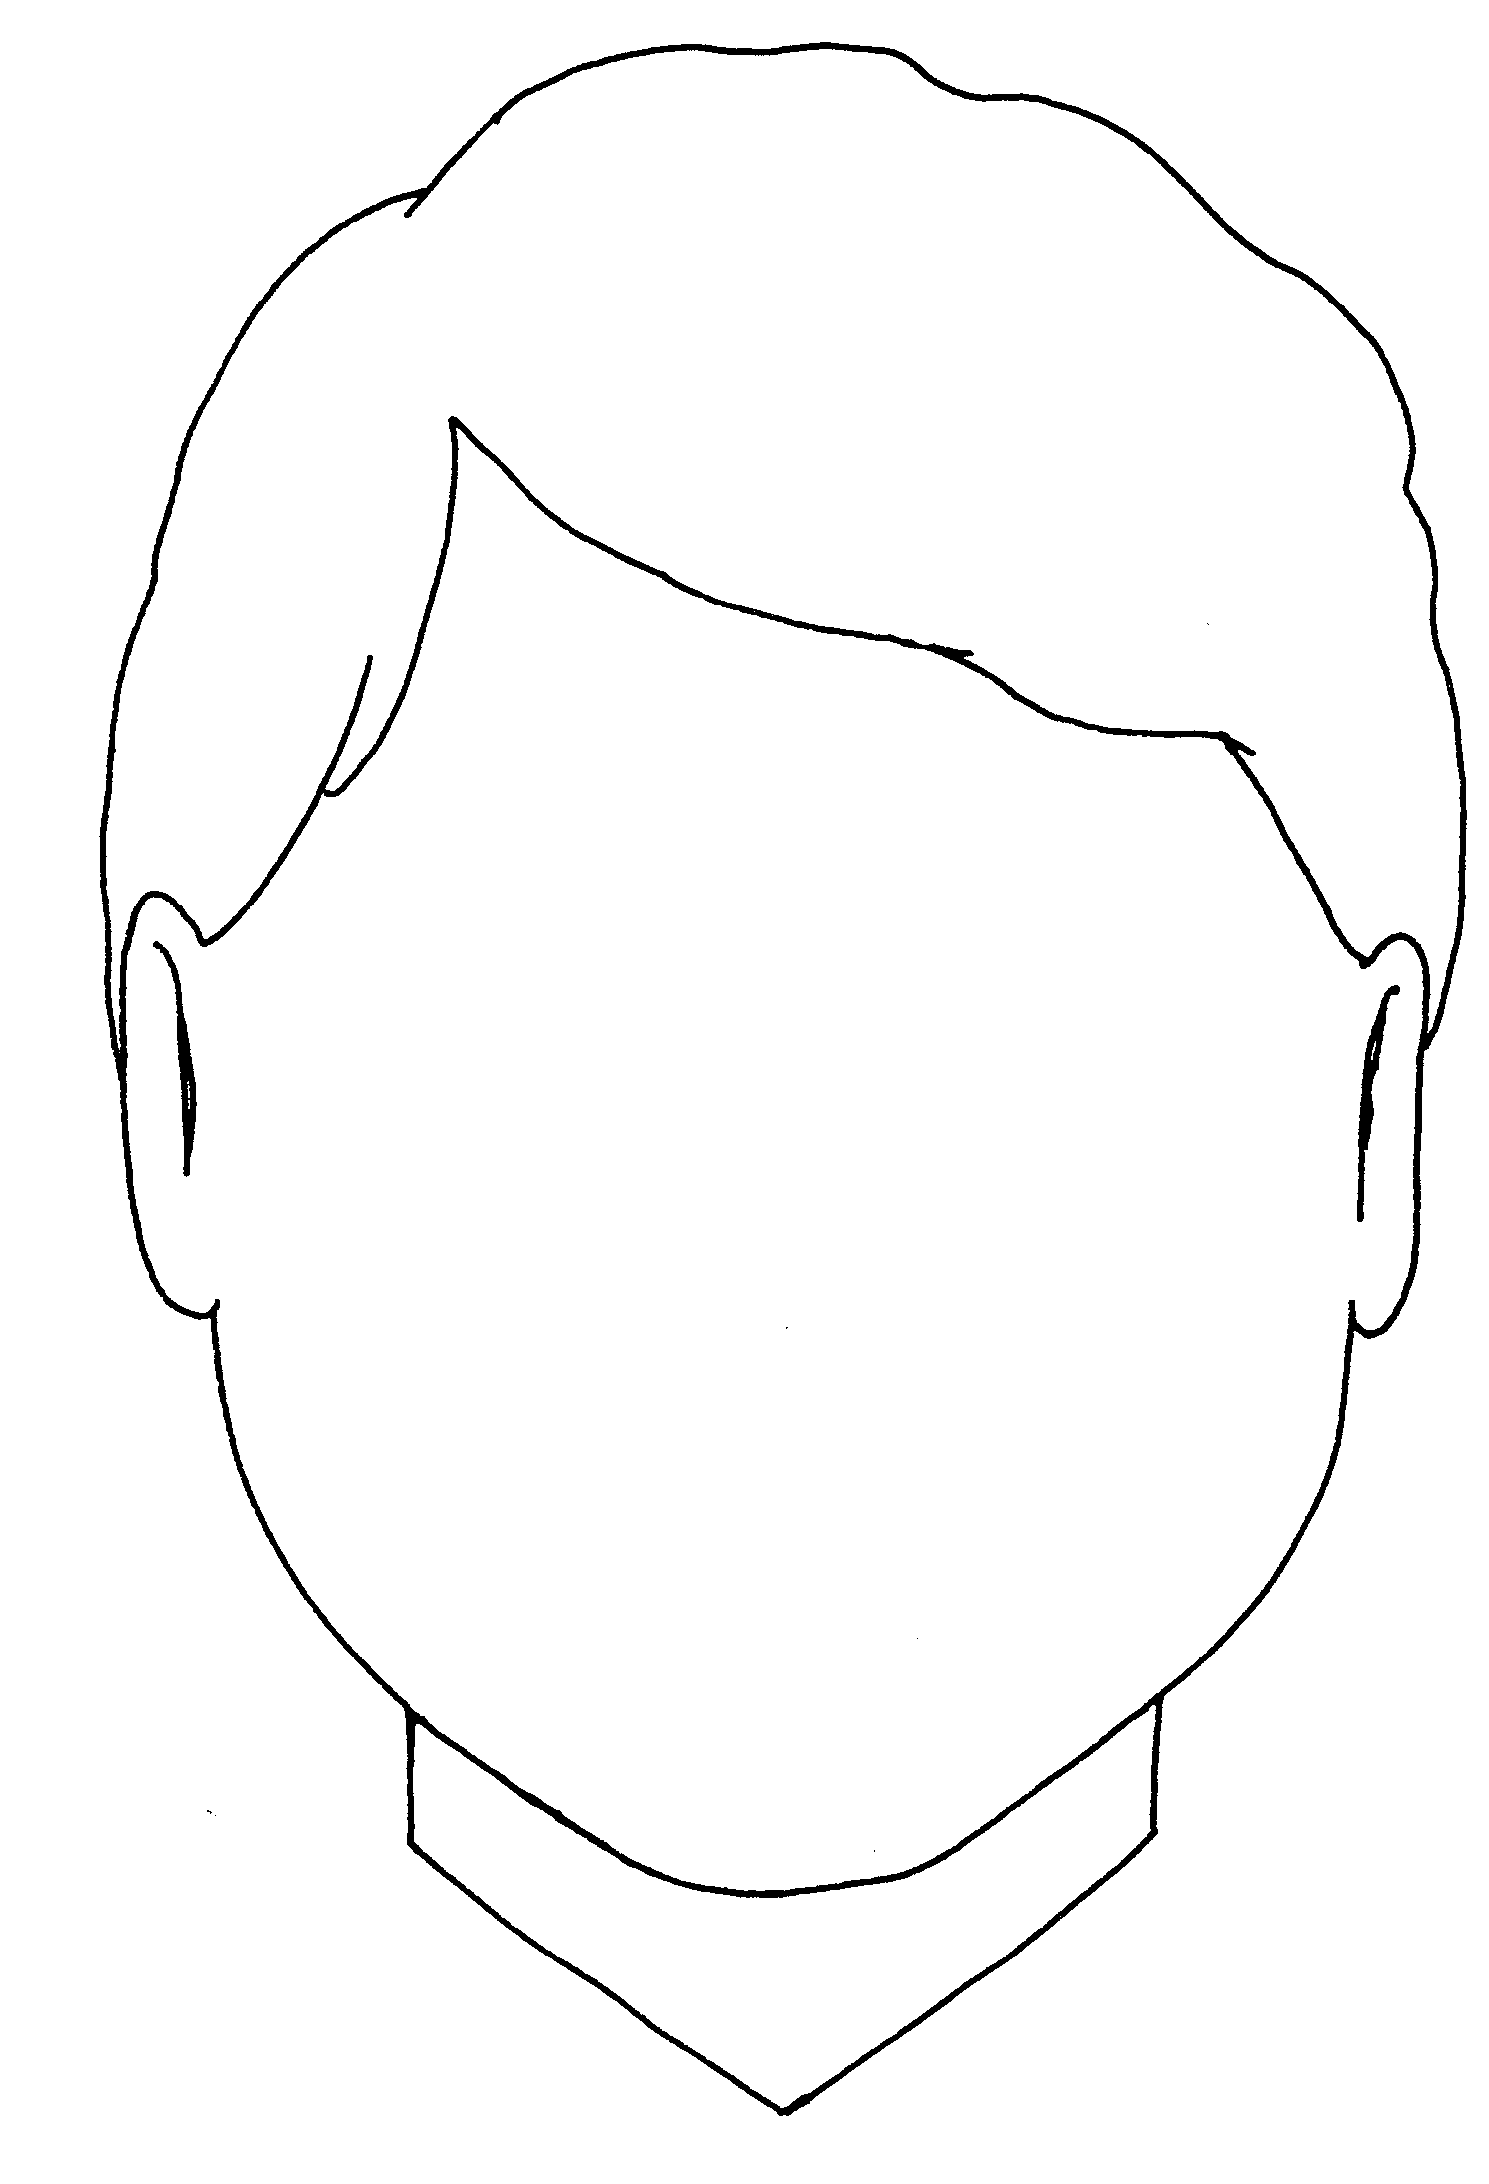 human head coloring page